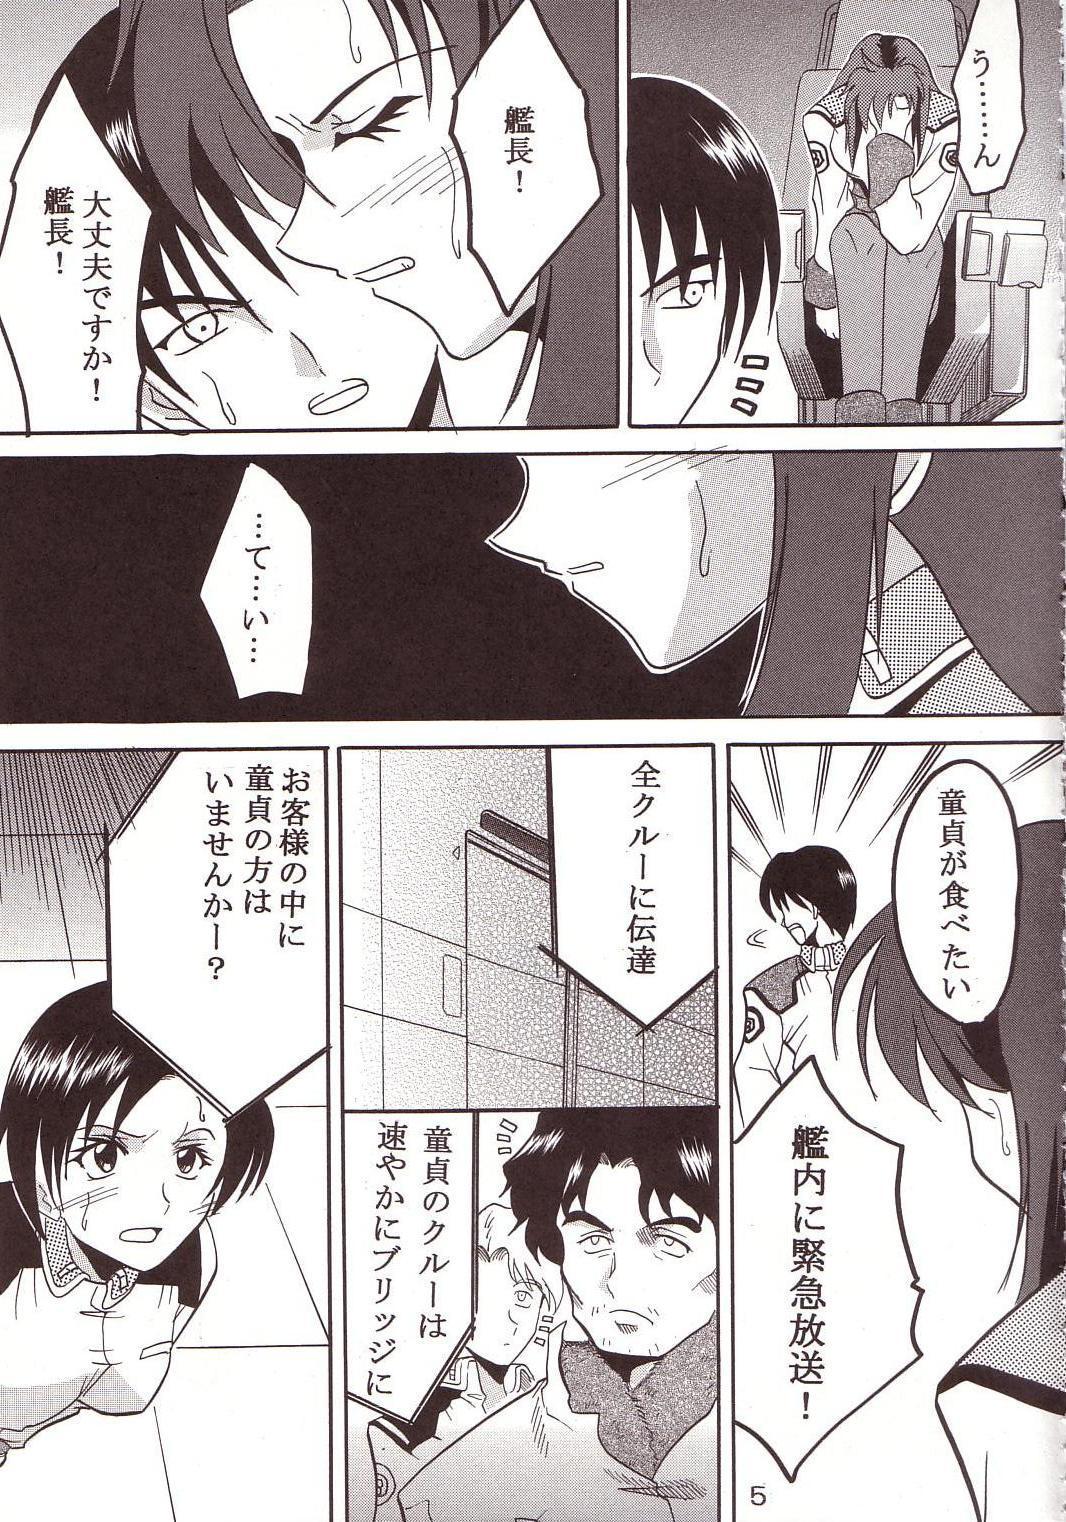 Reality SEED 3 - Gundam seed Fit - Page 6